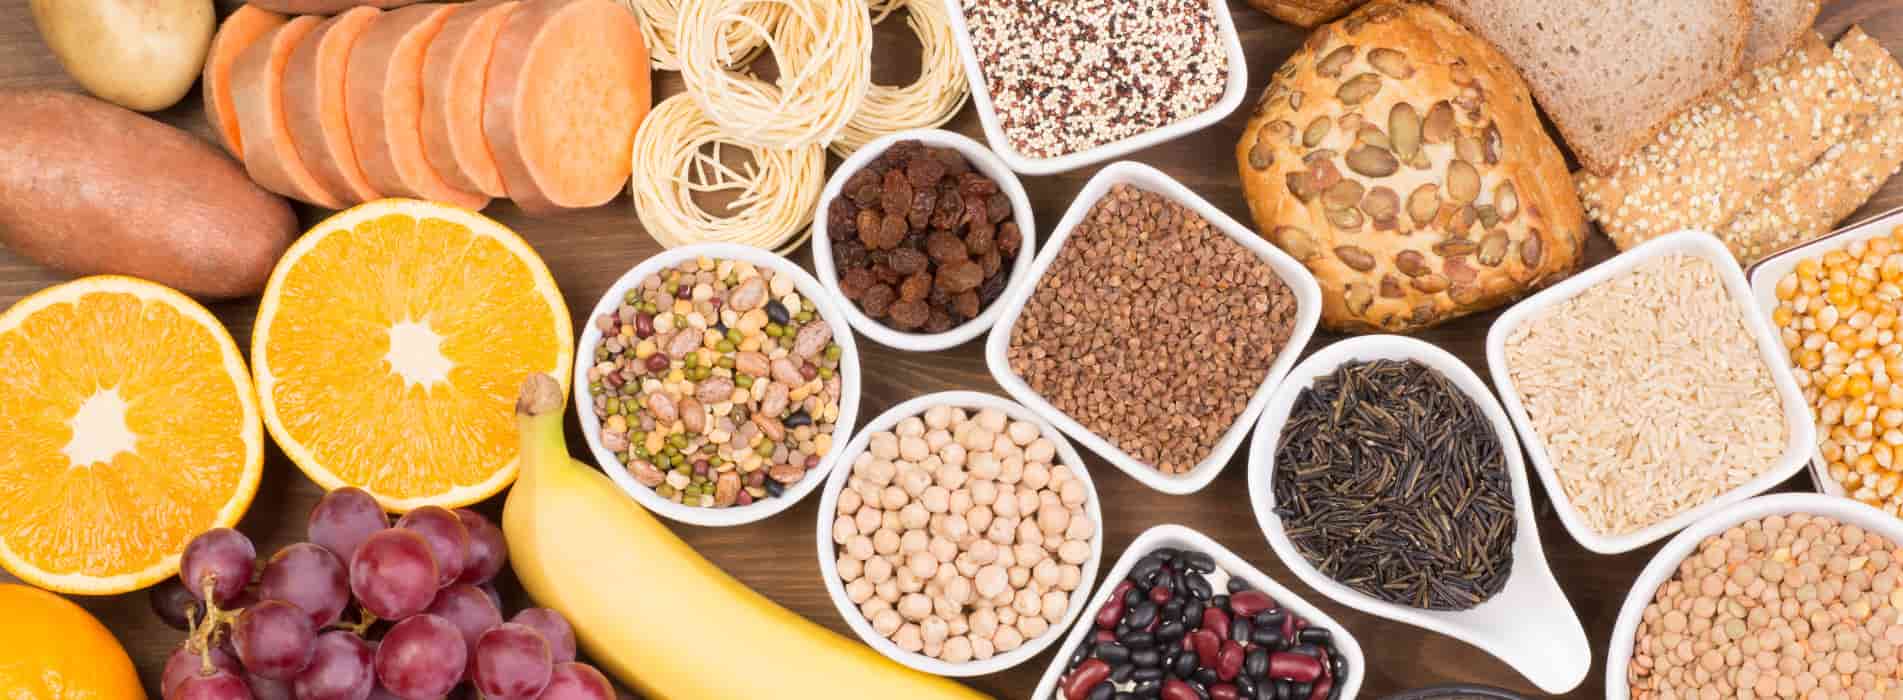 Importance Of Carbohydrates For Weight Loss